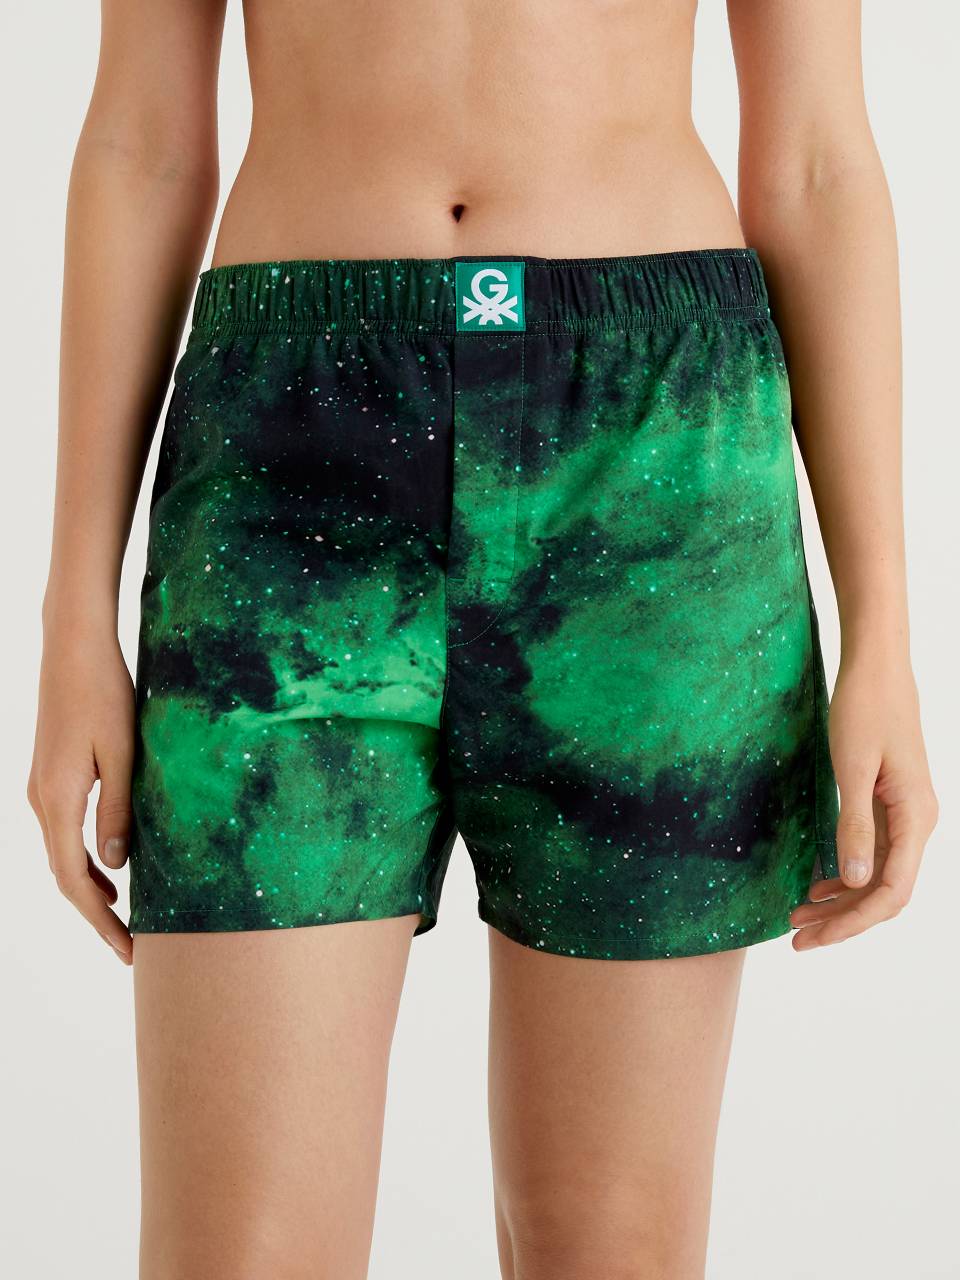 Benetton Space pattern boxers by Ghali. 1